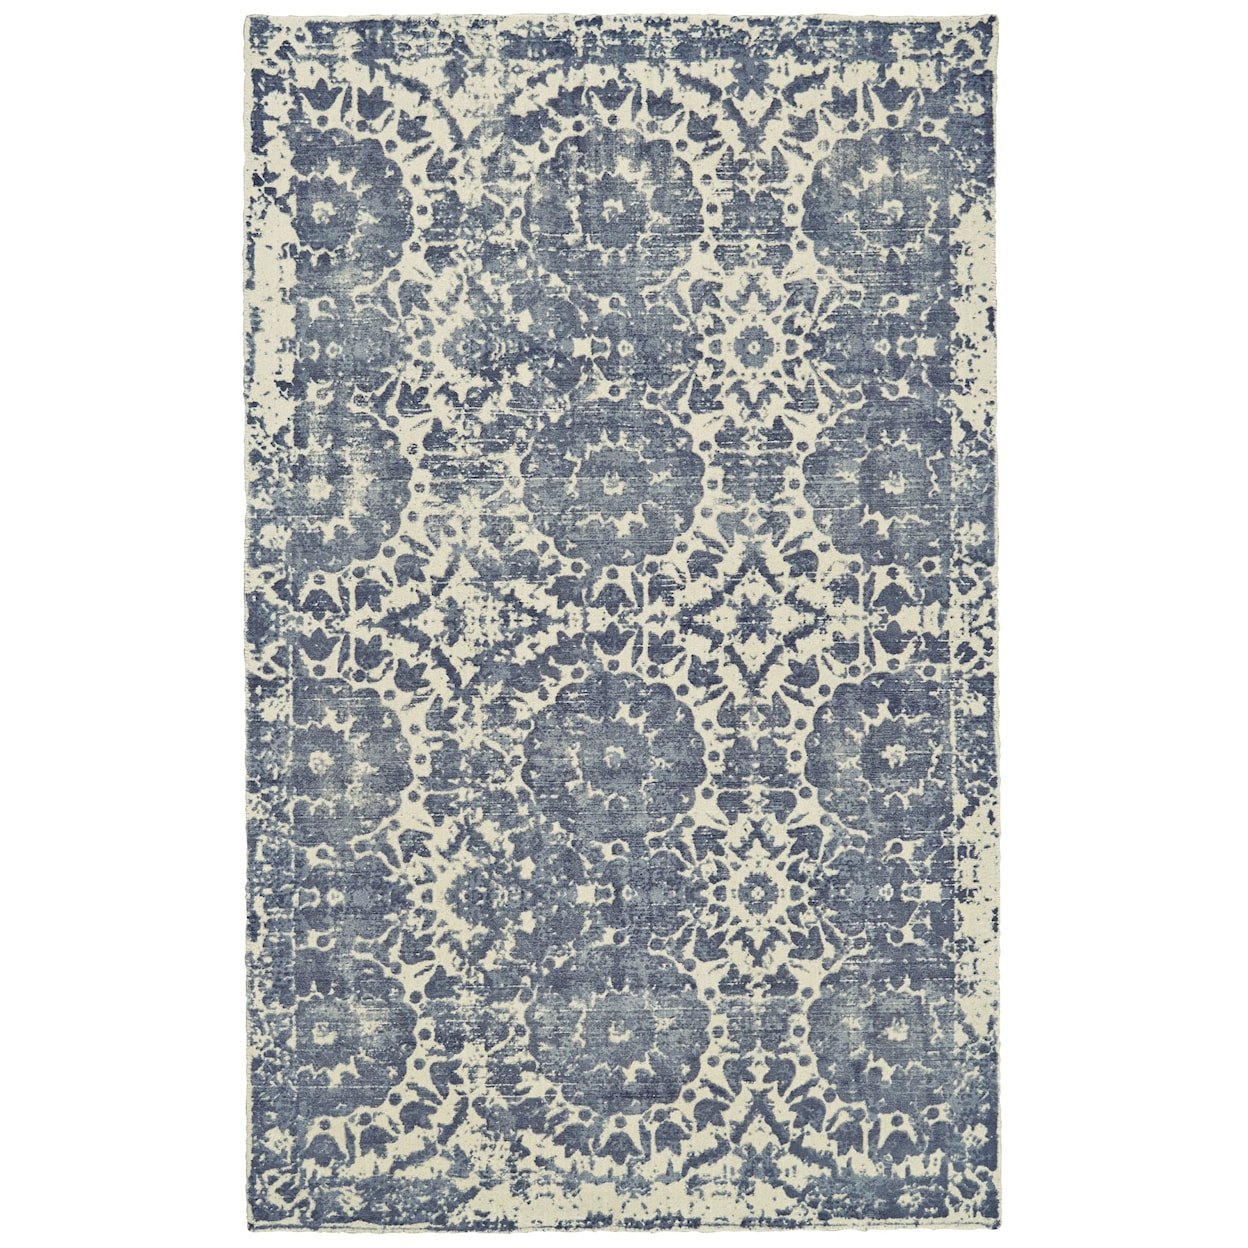 Feizy Rugs Dylan Winter 2' x 3' Area Rug